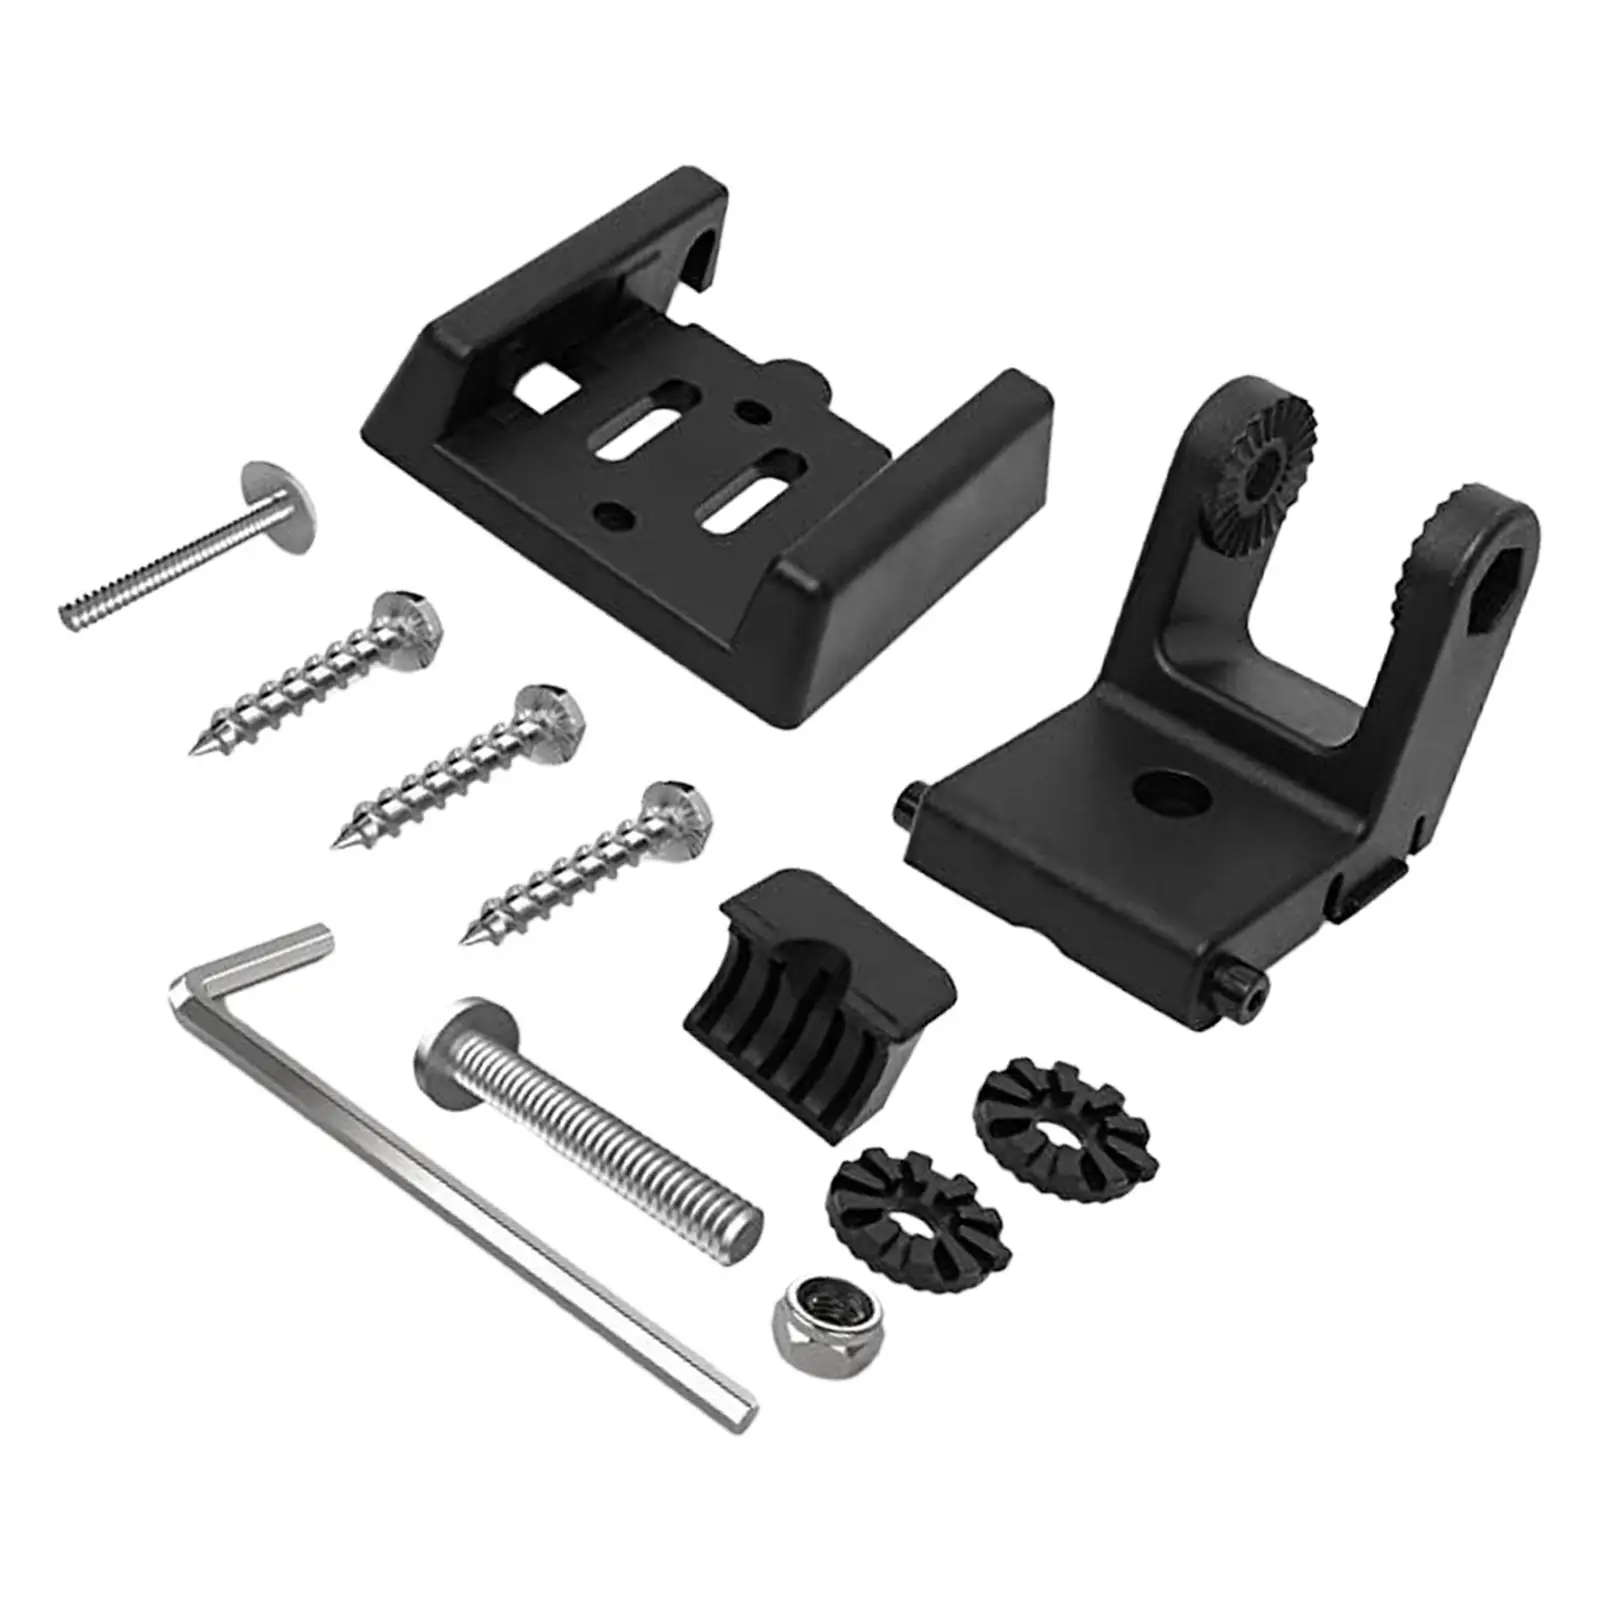 Transducer Bracket Replacement Transducer Mount Transom Mounting Hardware Set for XNT 920T 9HW T 1474T 1420T 928T 9HW